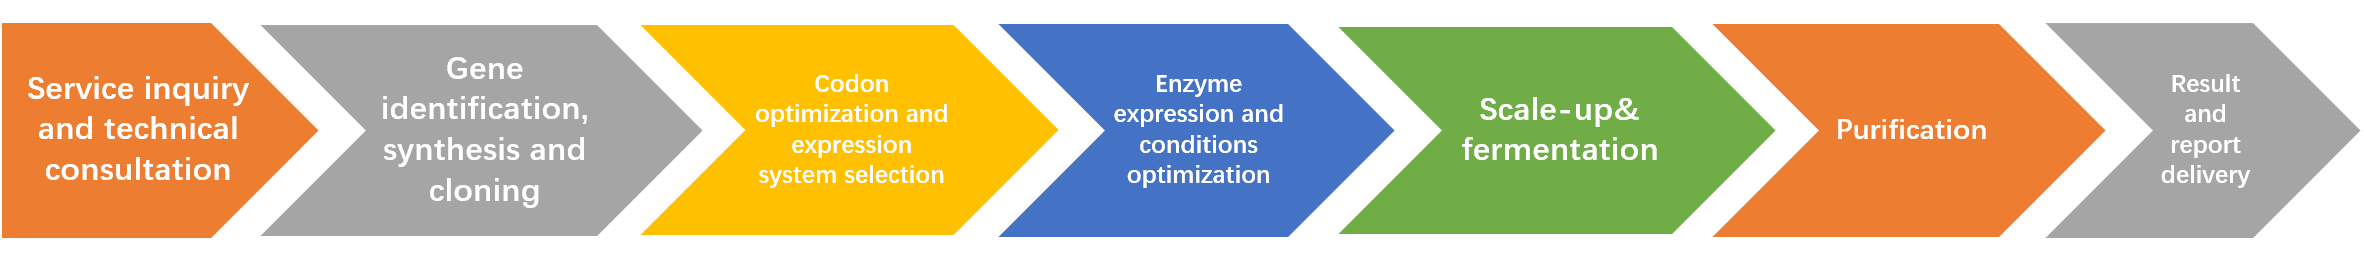 Enzymes expression service workflow 